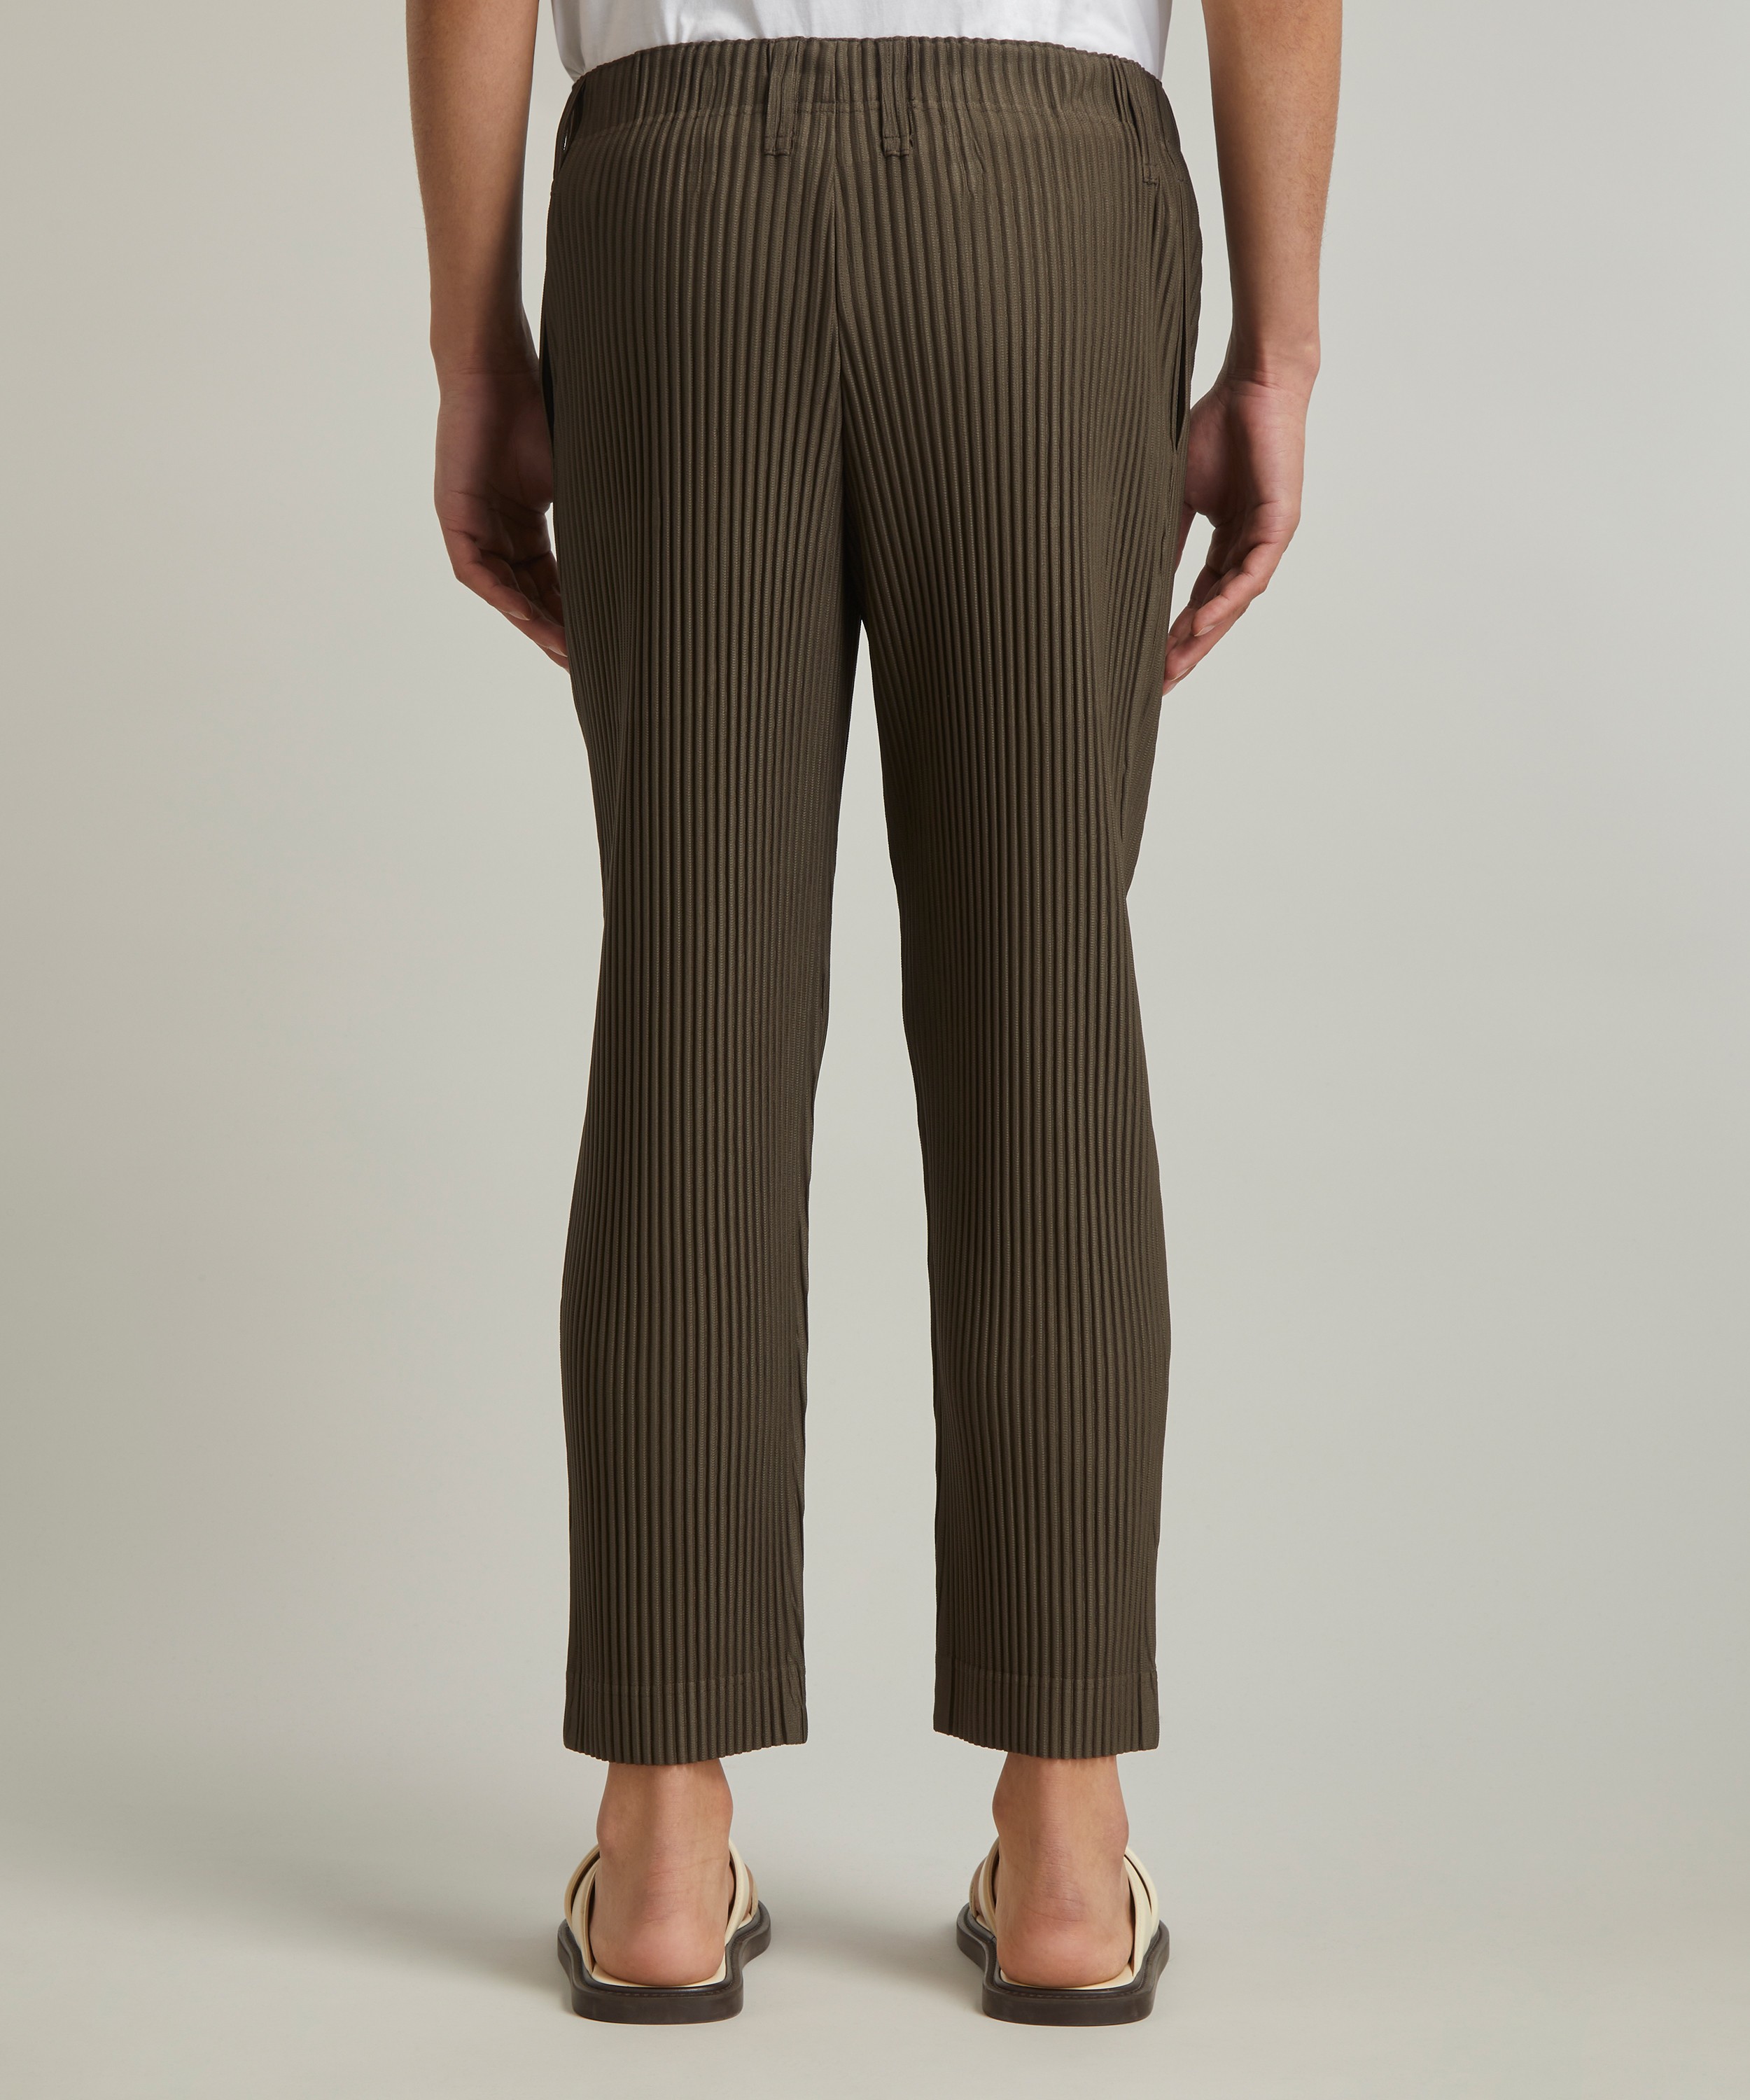 Homme Plisse Issey Miyake Tailored Pleats 1 Straight Trousers 